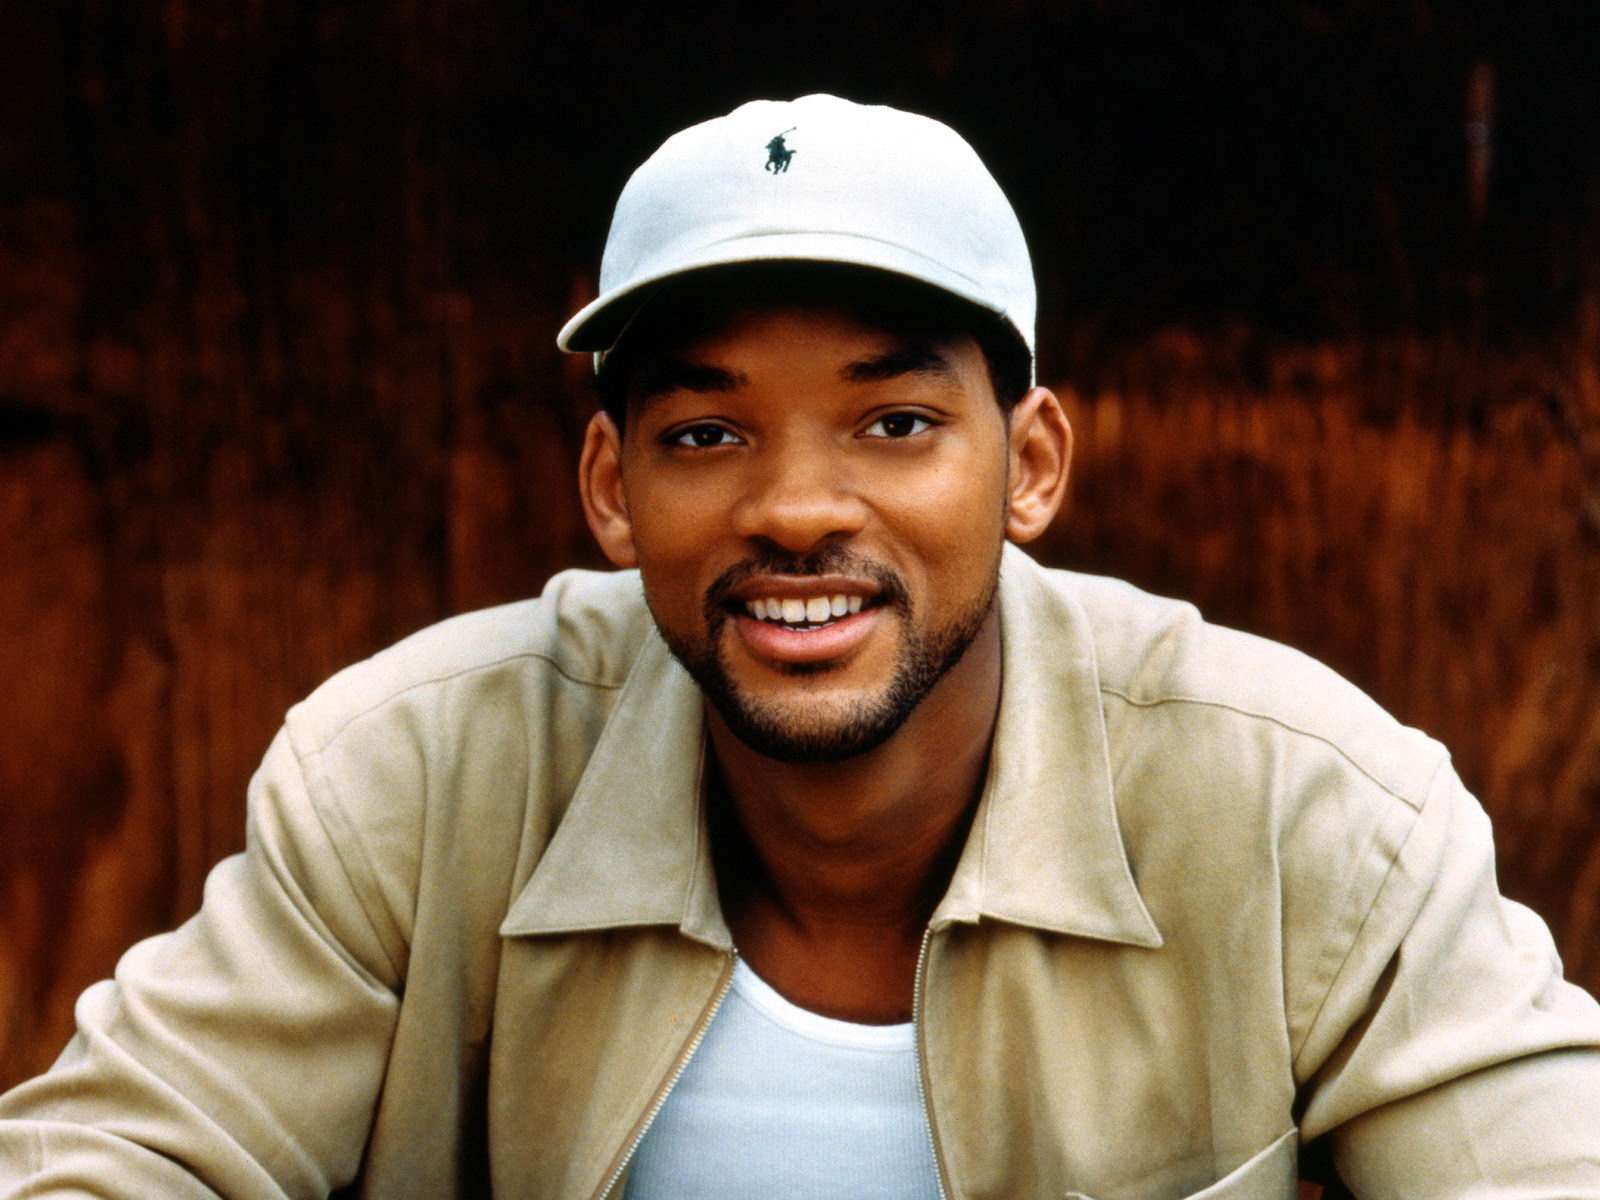 Will Smith in white baseball cap wallpapers and images - wallpapers ...